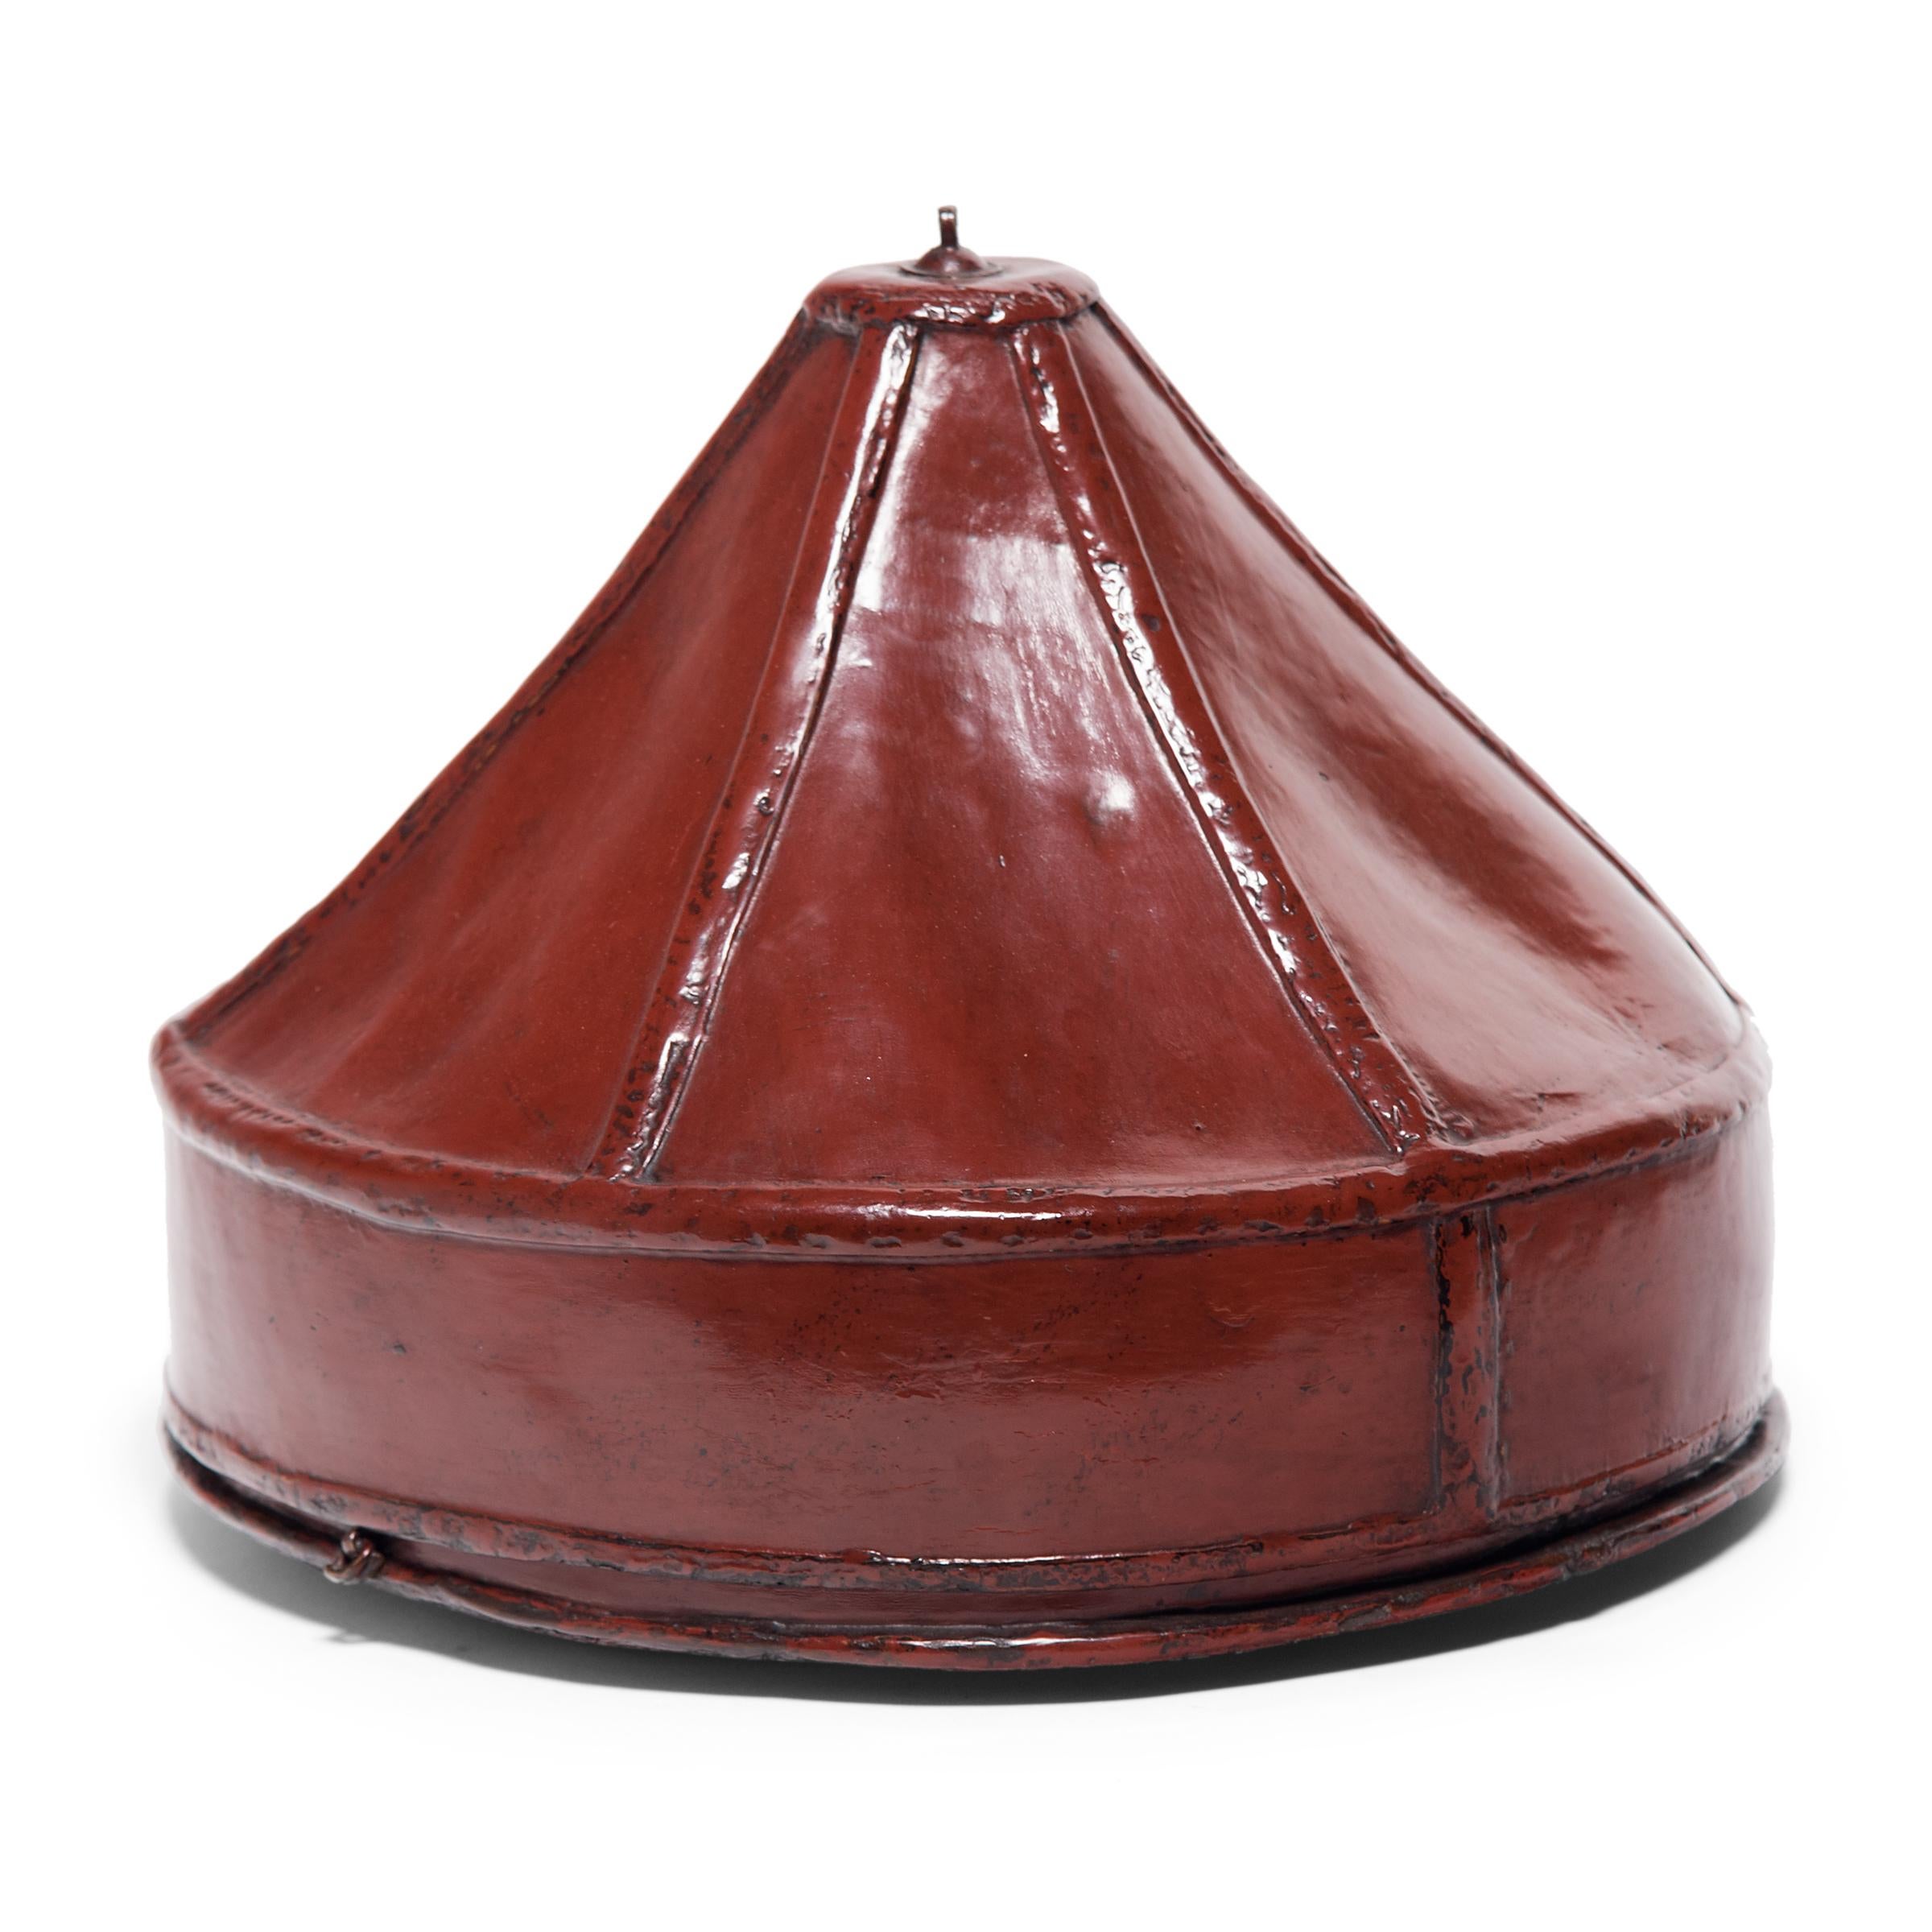 No self-respecting man in Qing-dynasty China would leave the house without some kind of hat. In fact, headgear was so central to social status that even the containers used to store one's hat were beautifully constructed.

This pointed hat box